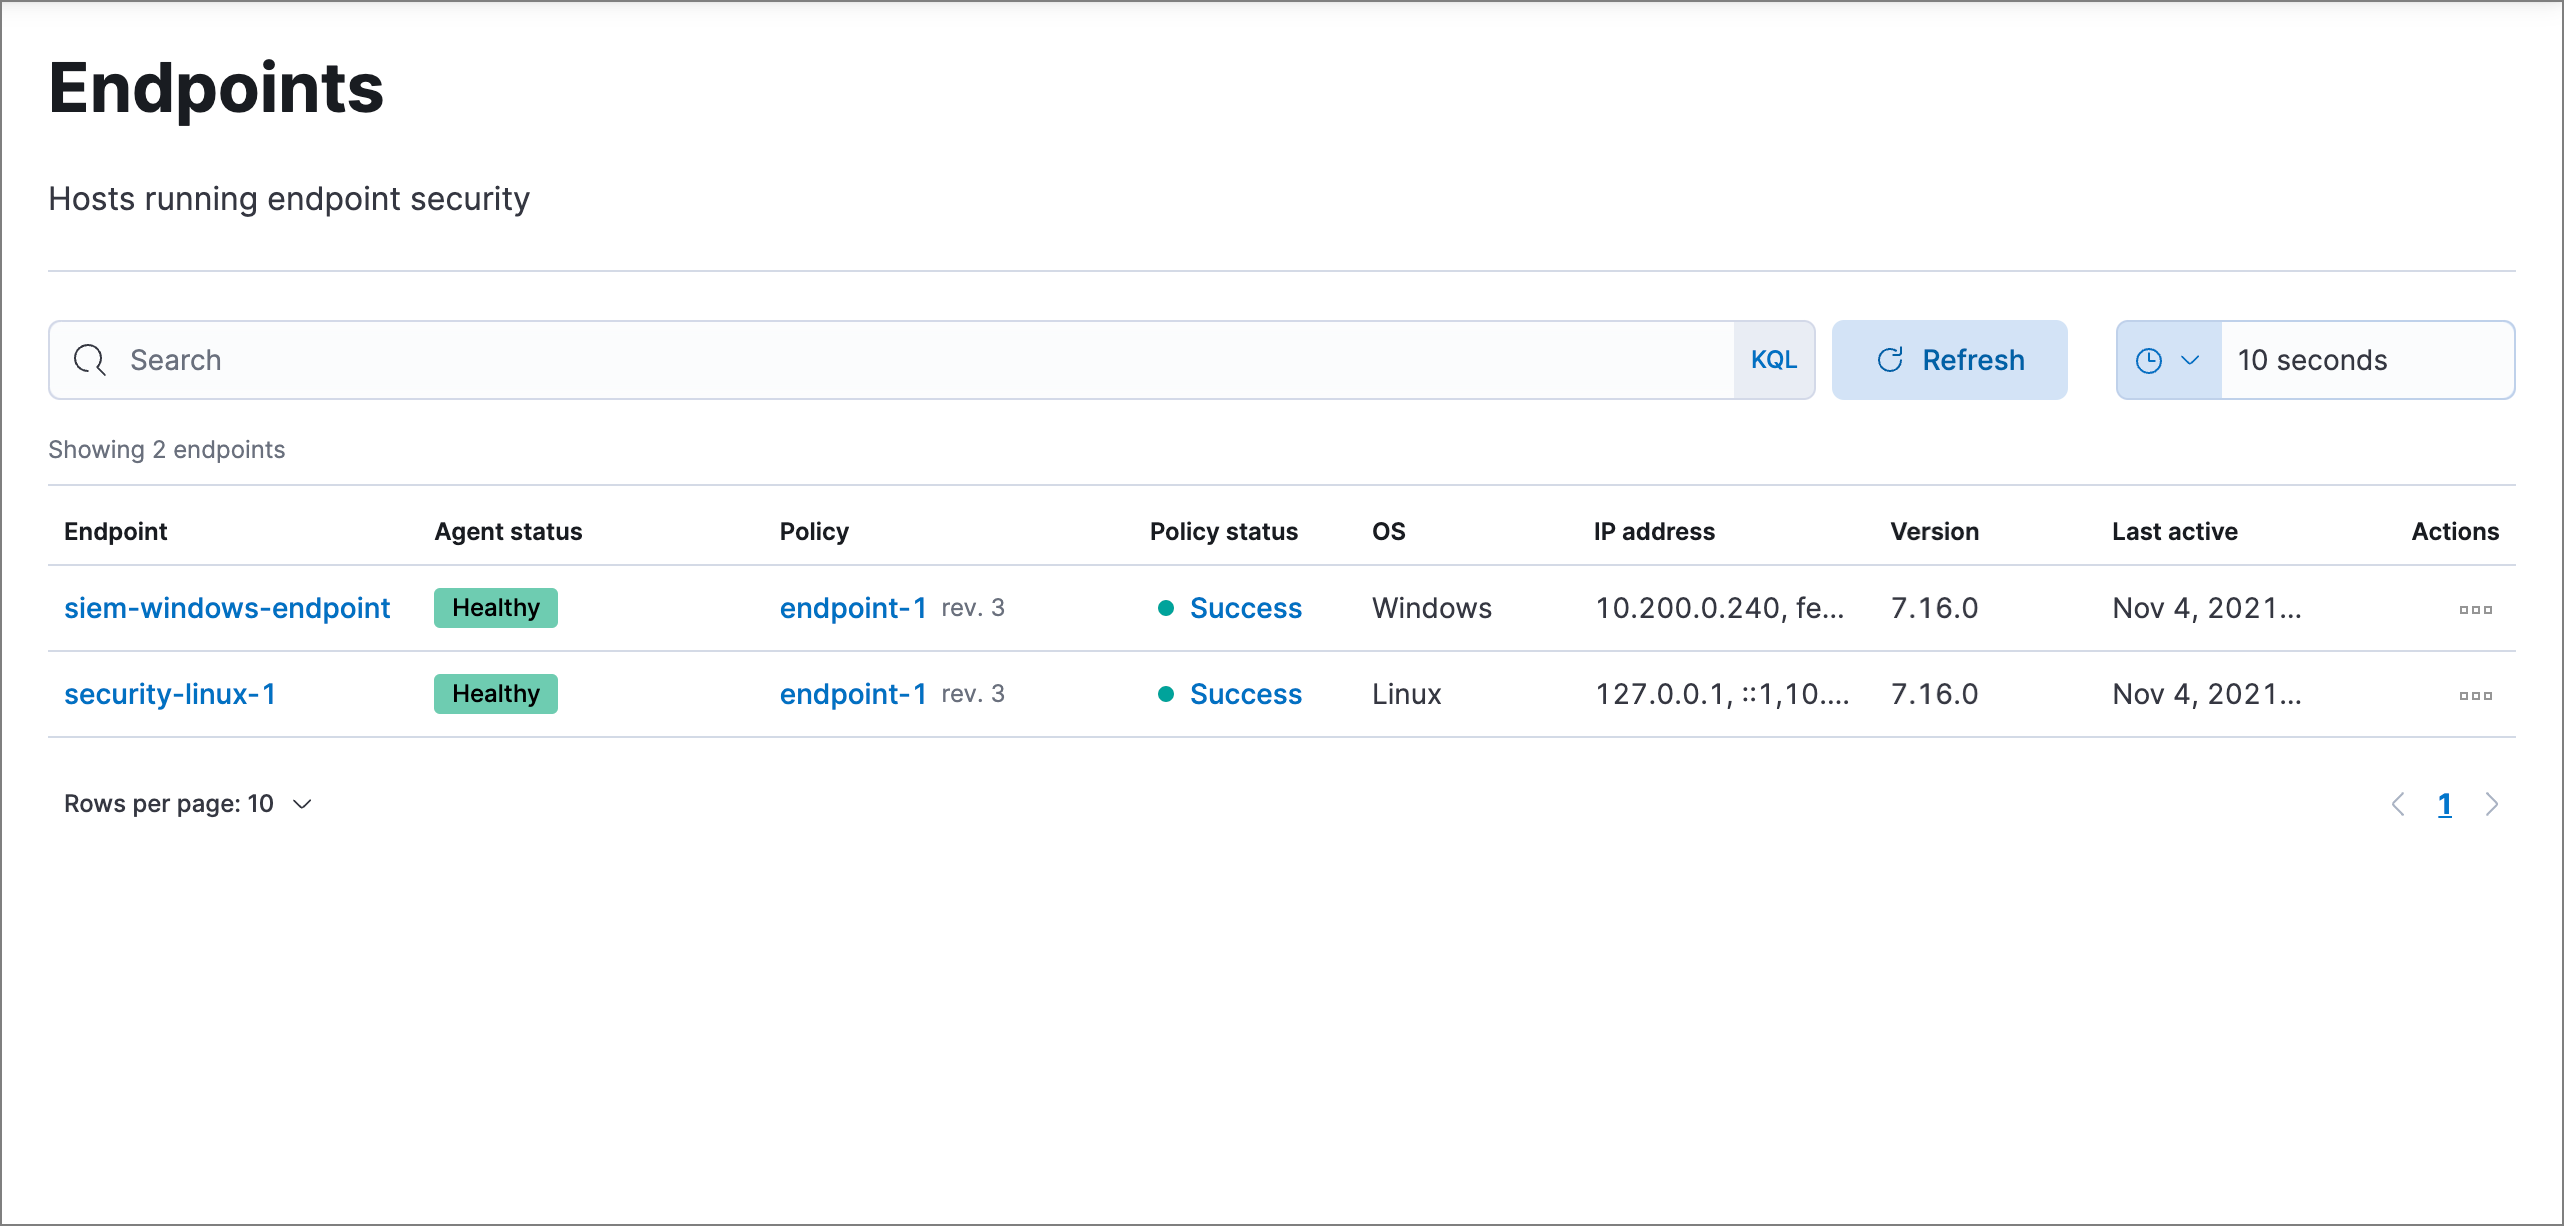 Shows the Endpoints page